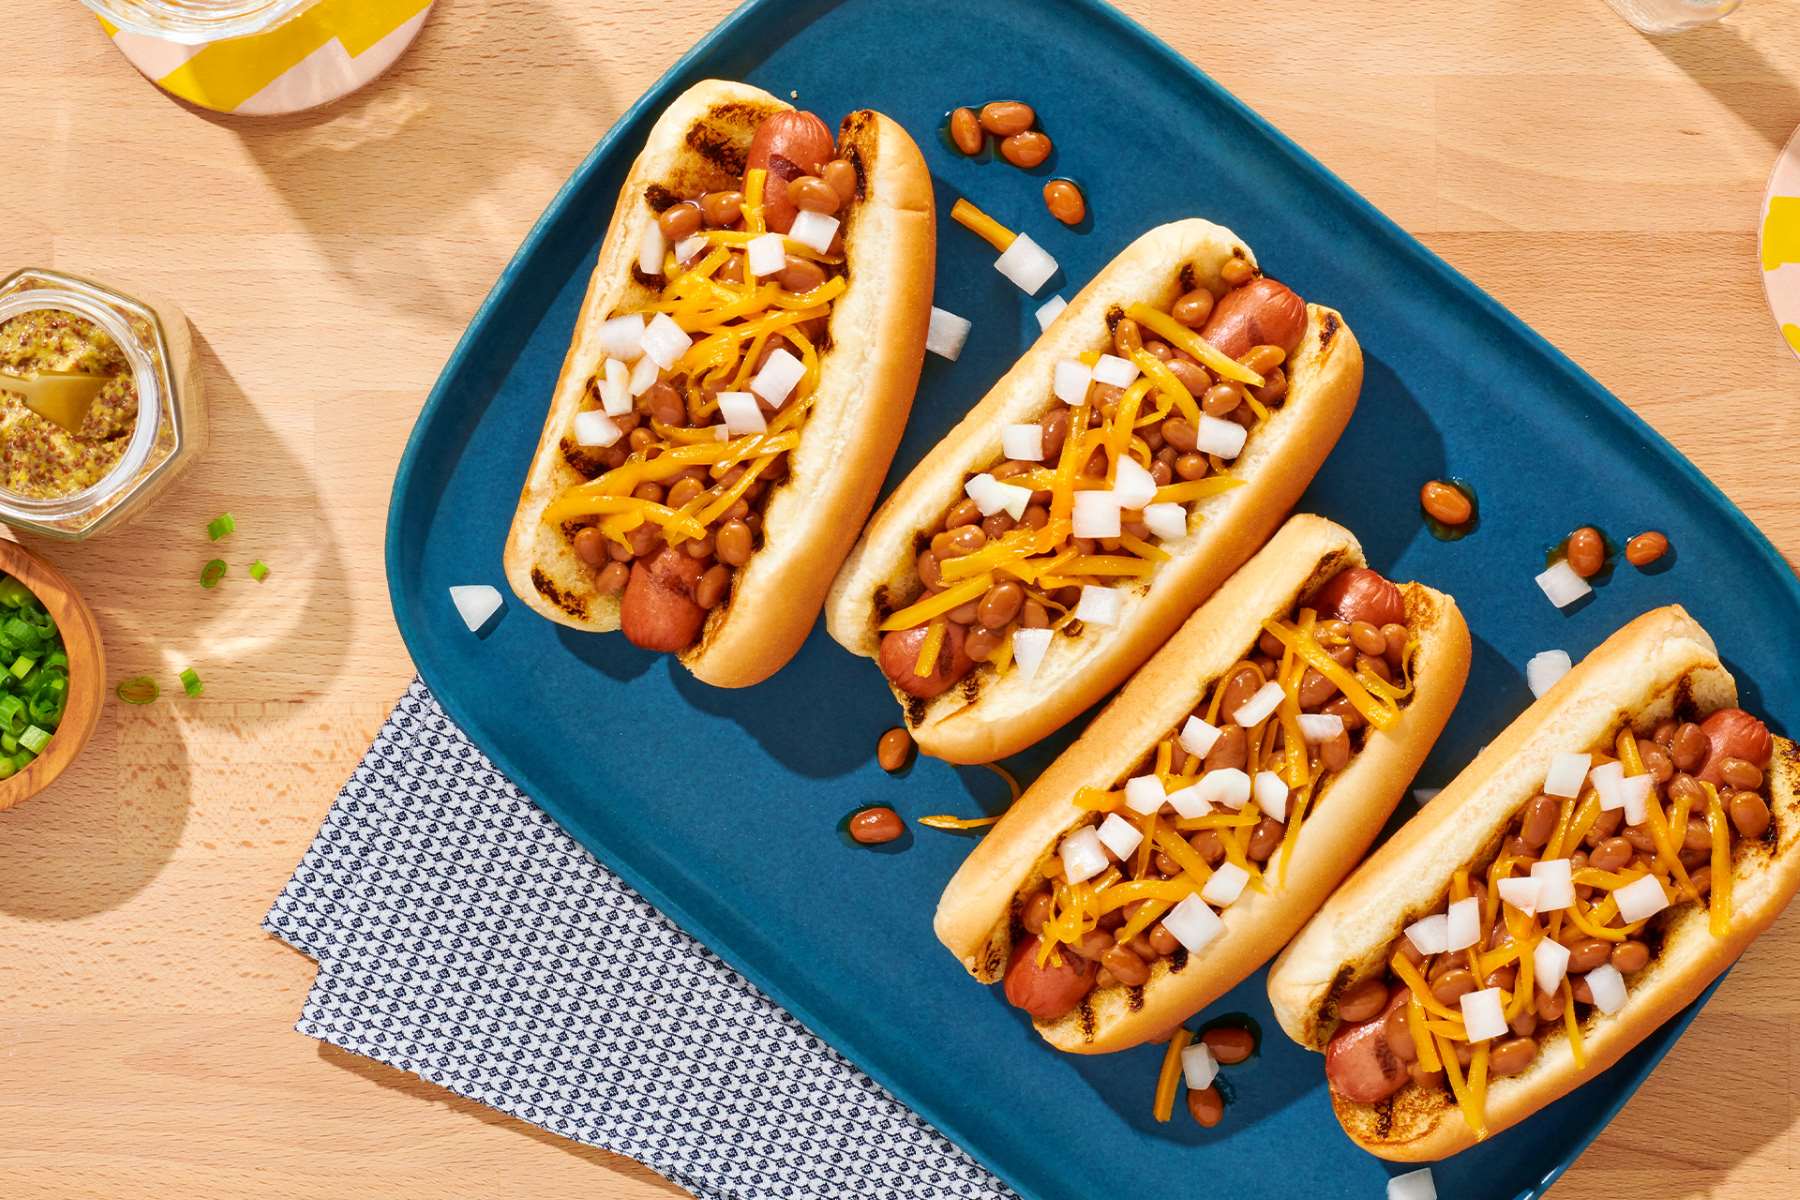 Delicious Hot Dogs With Baked Beans And Roasted Delights